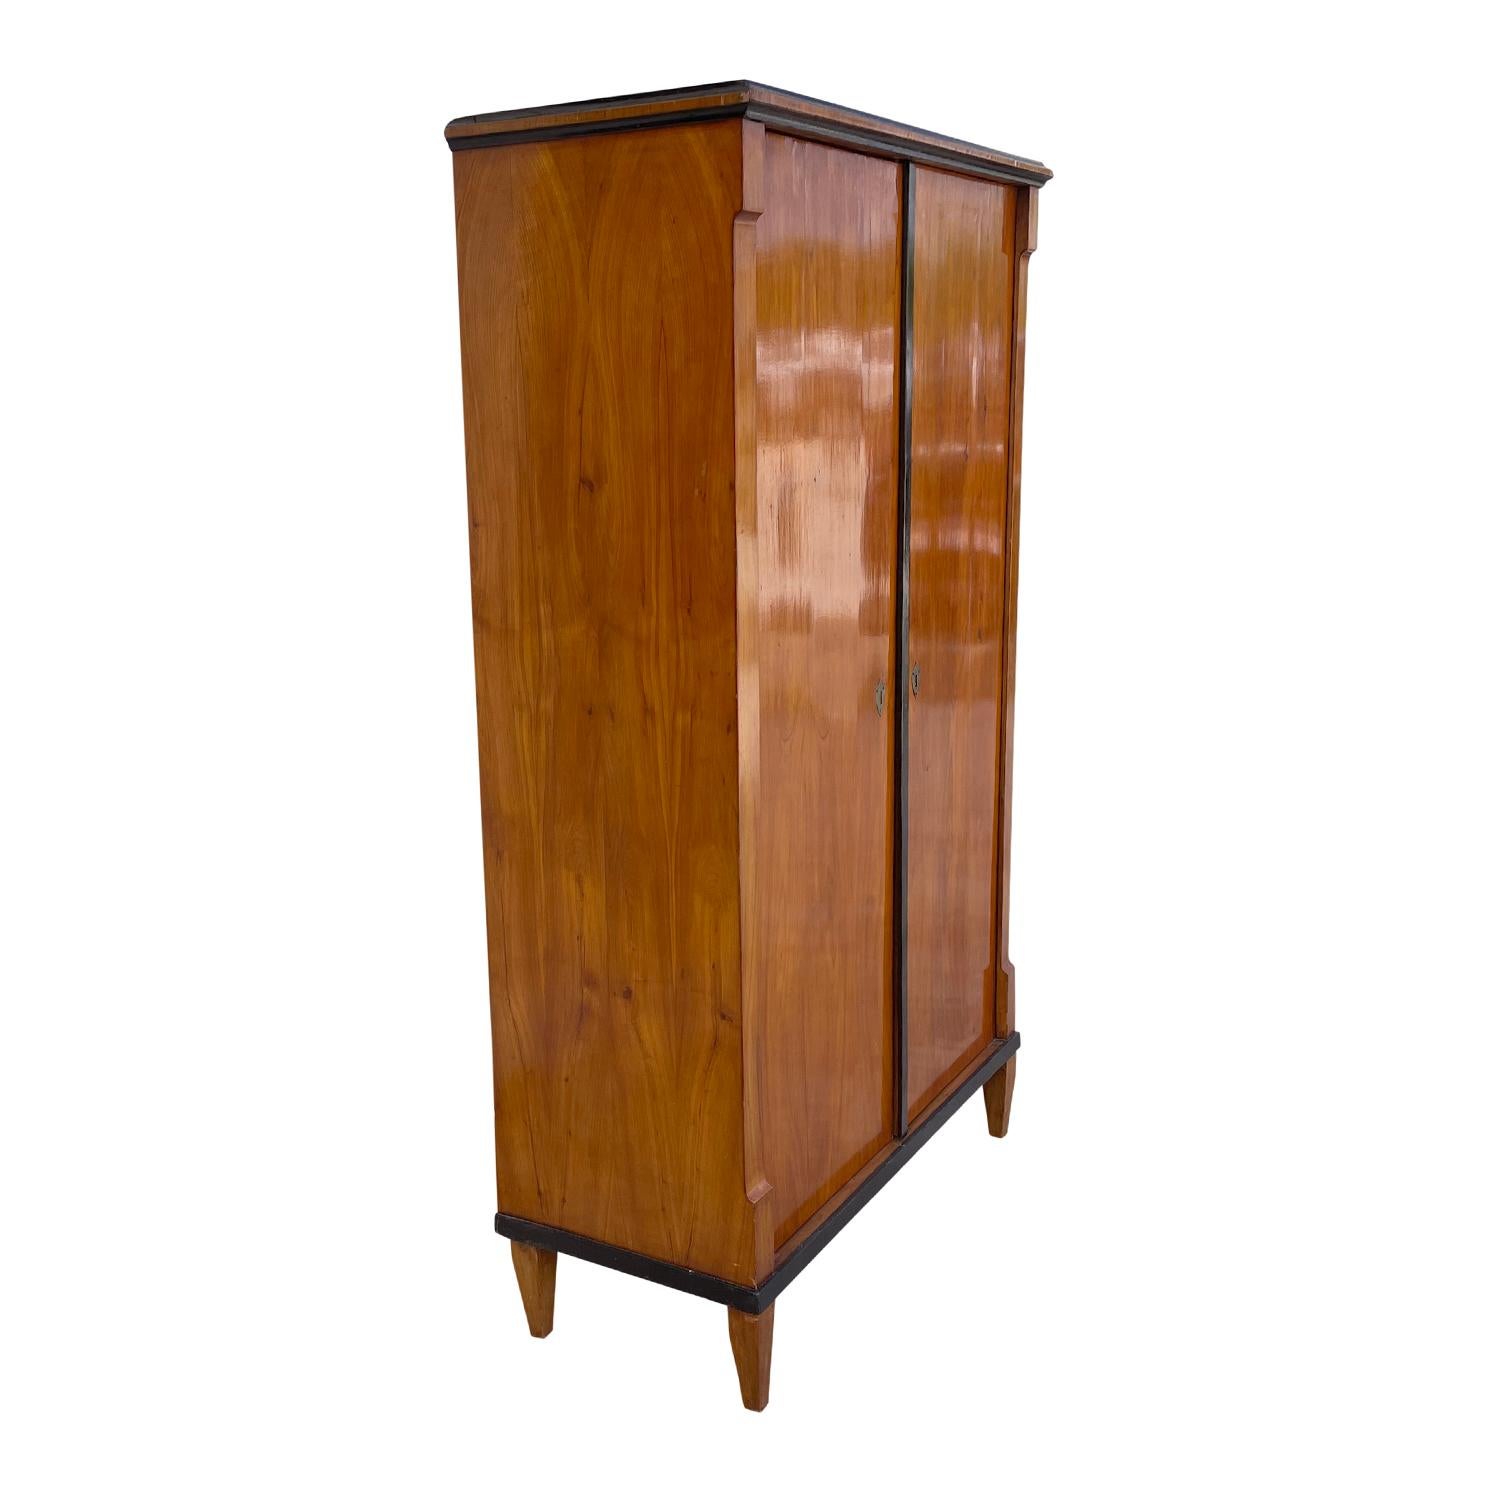 A light-brown, antique German sideboard, cabinet made of hand crafted polished Mahogany and walnut in good condition. The cupboard is composed with two doors, the frame is black lacquered, standing on four small feet. The interior consists